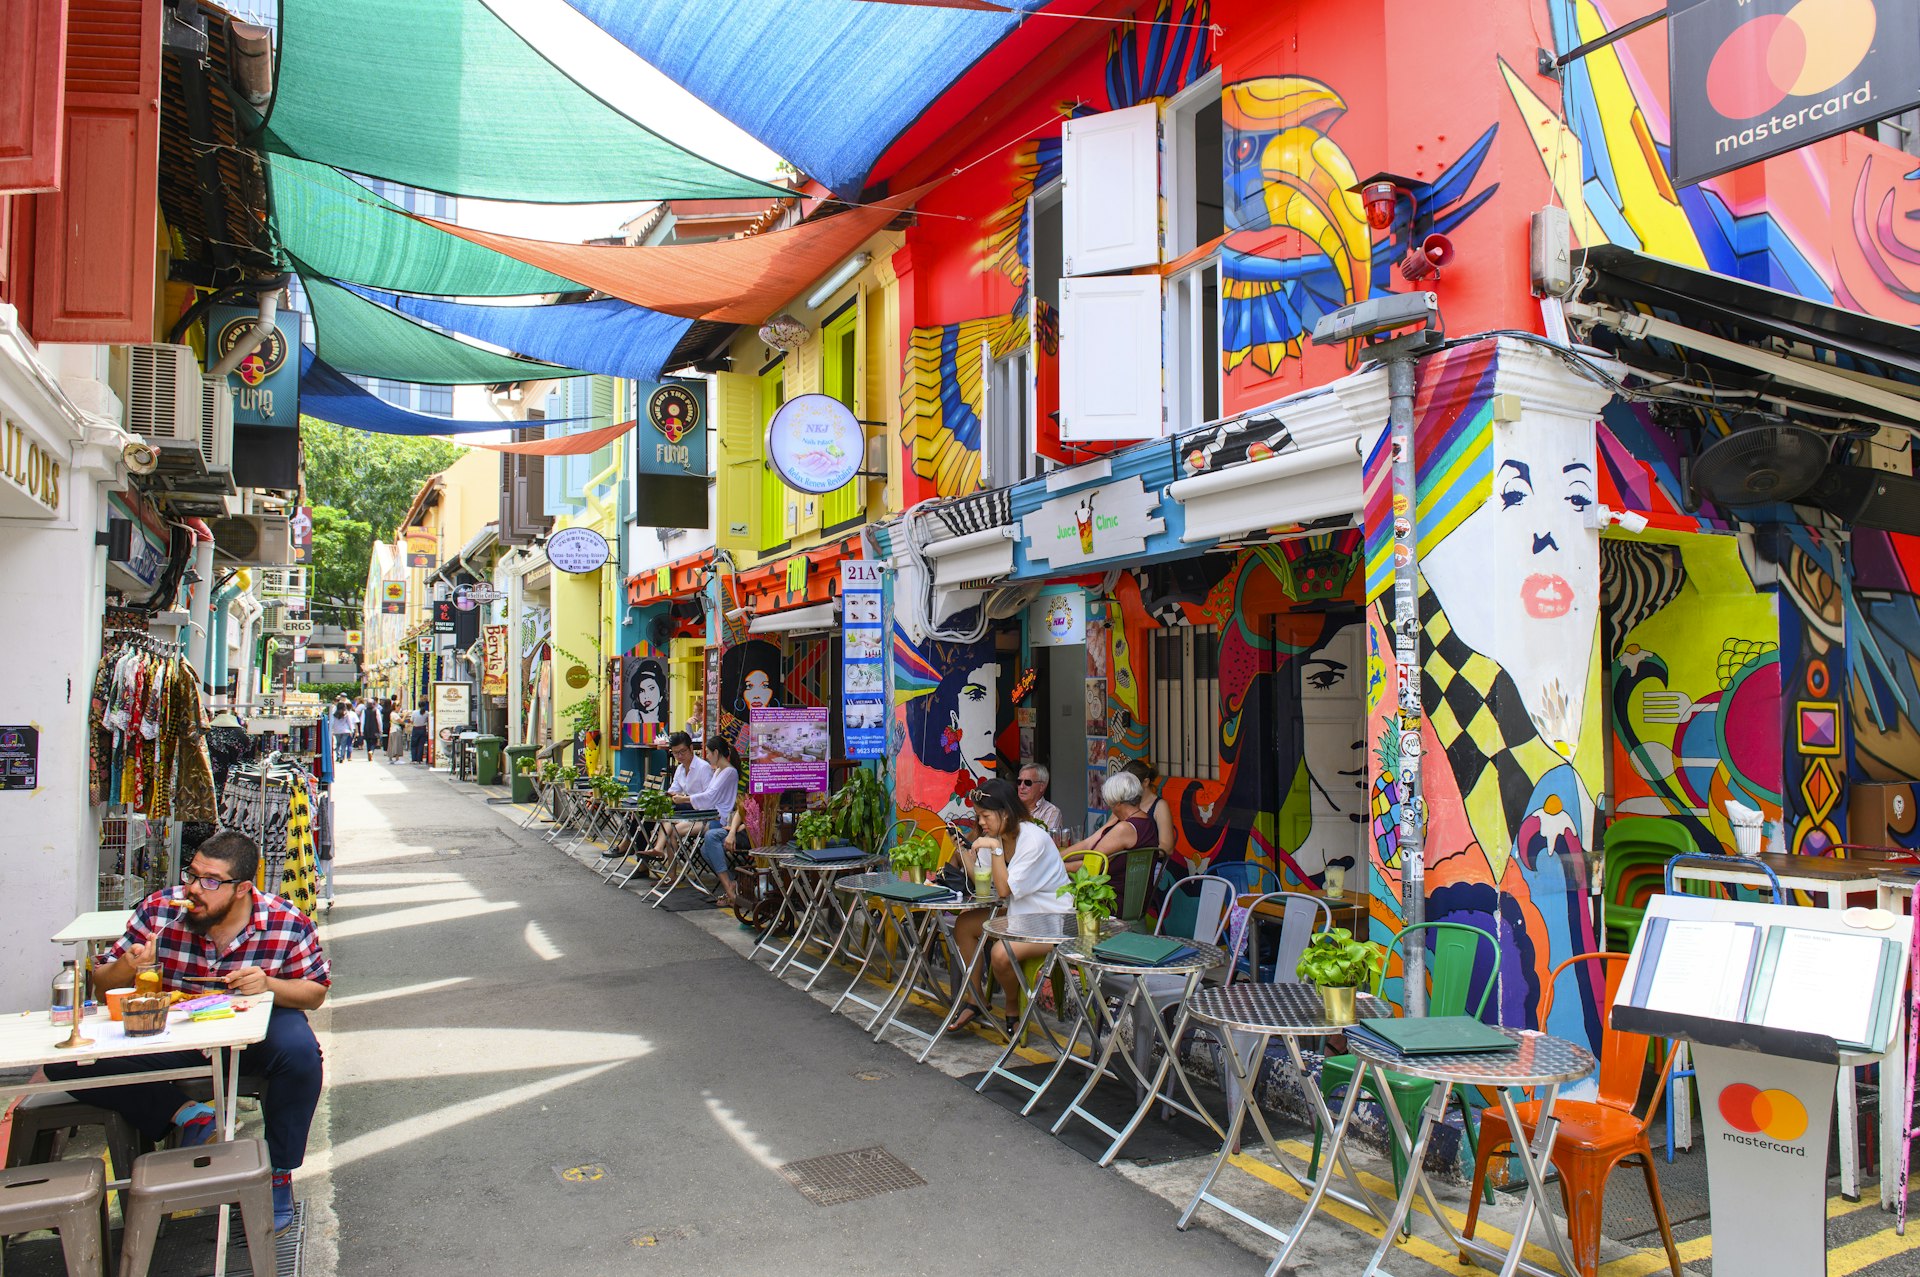 People sit at tables outside cafes on a brightly decorated street